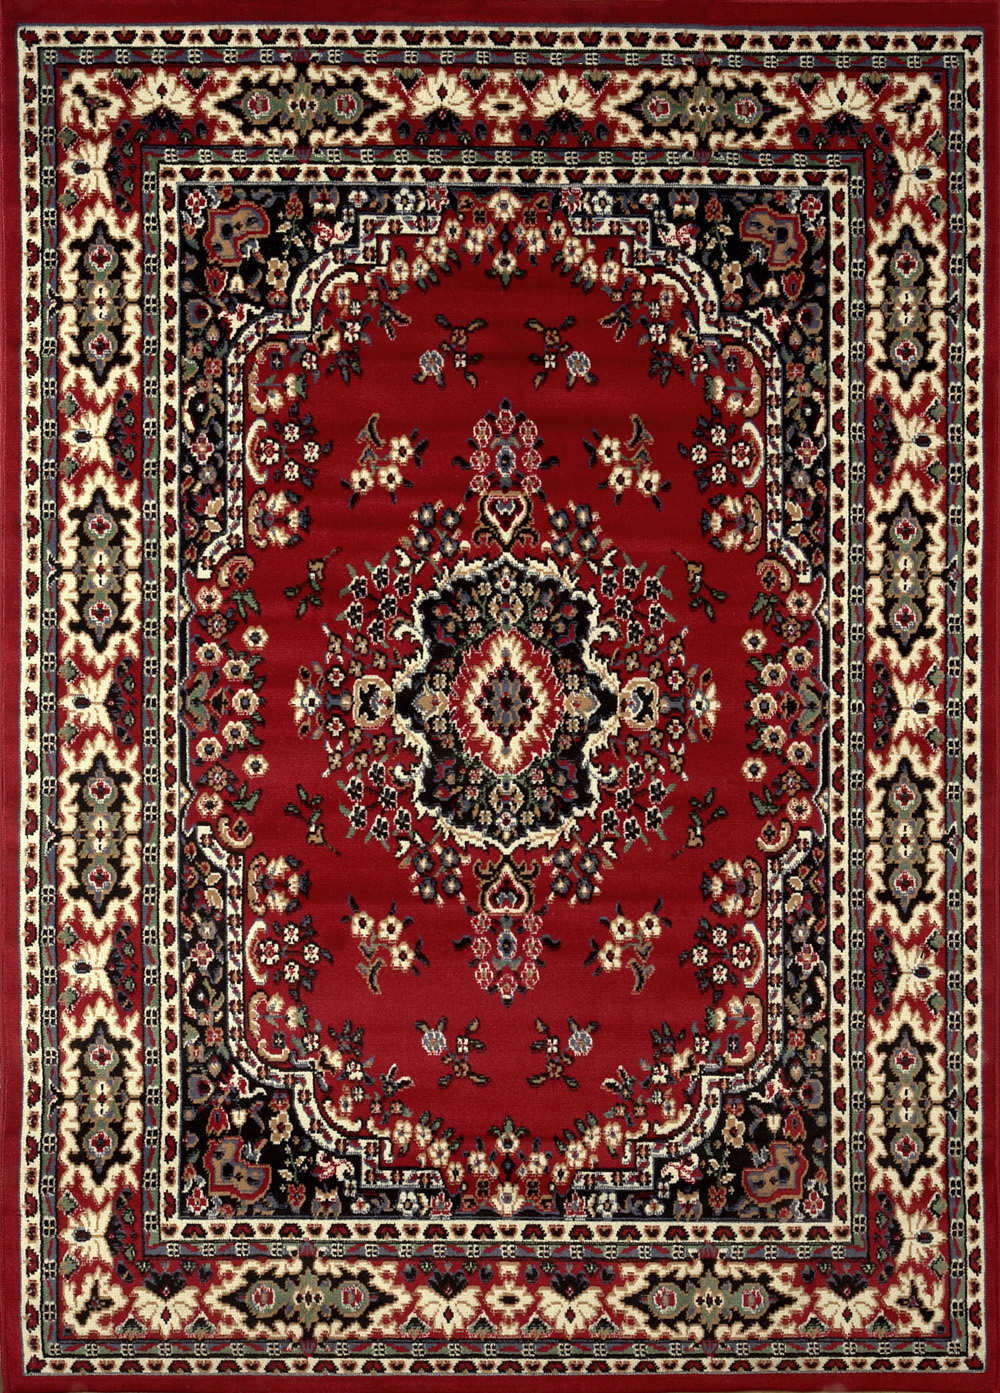 Persian area rugs traditional oriental medallion area rug persian style carpet runner mat  allsizes WUAXJMW